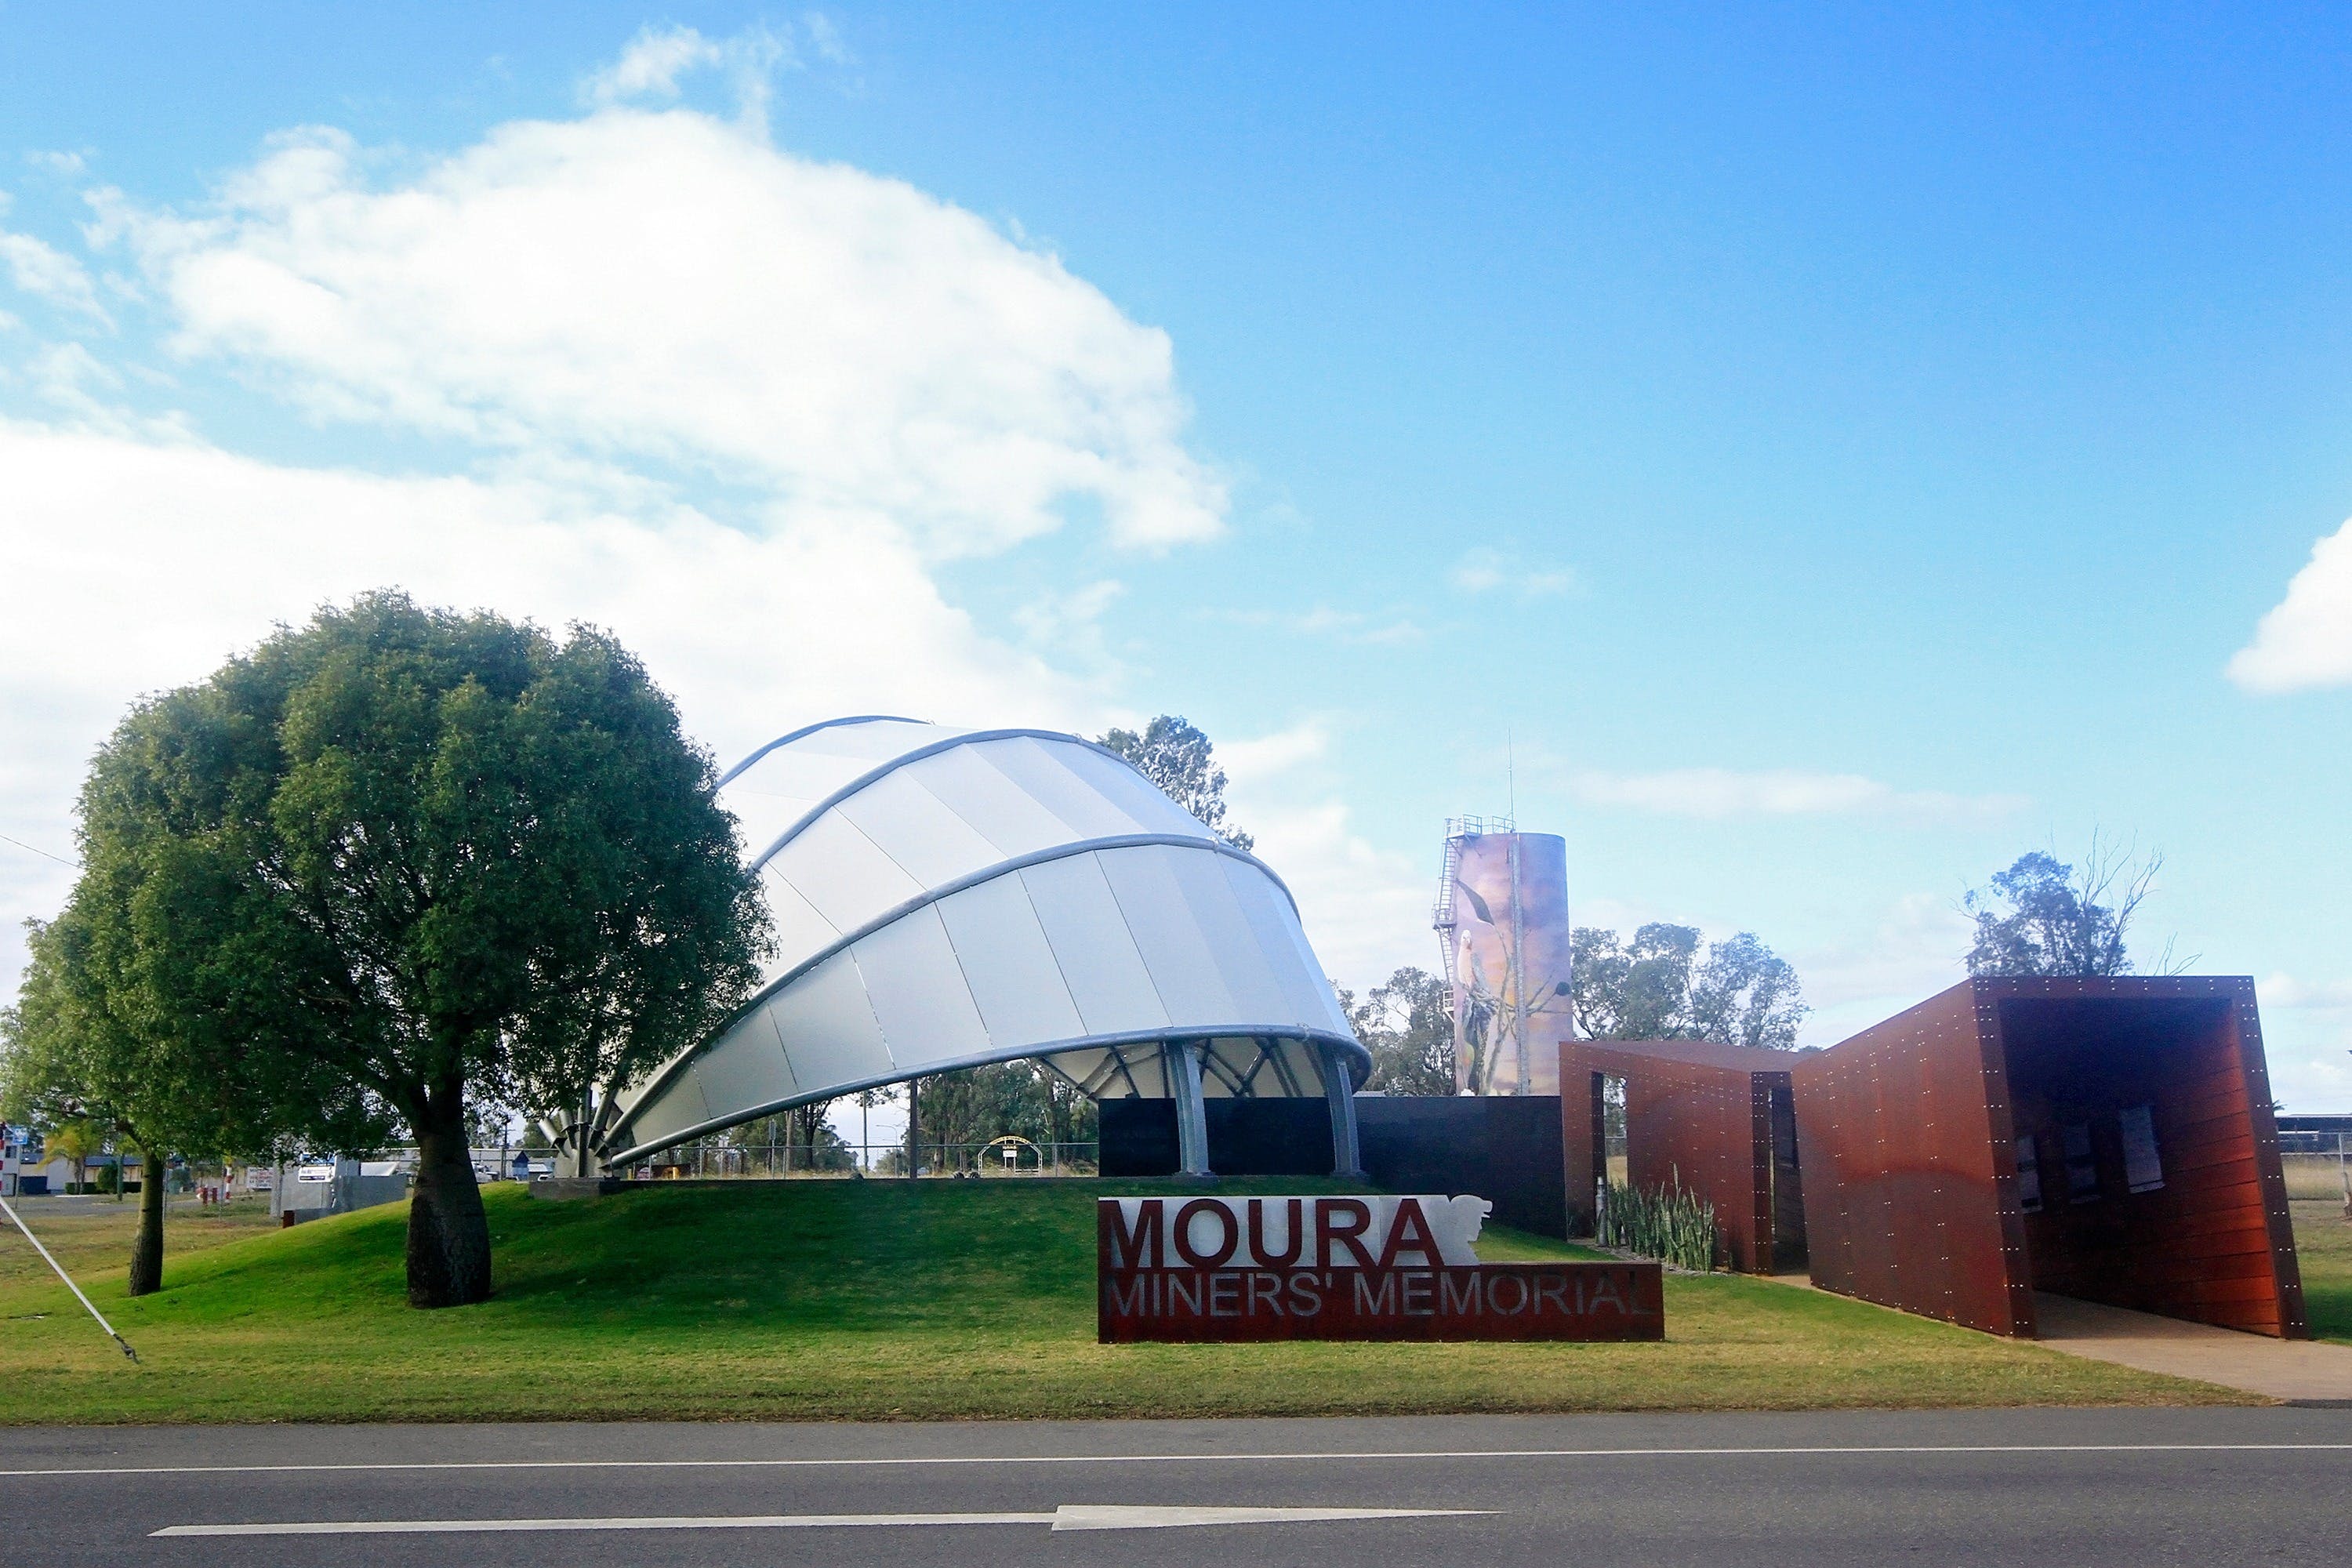 Moura - Find Attractions